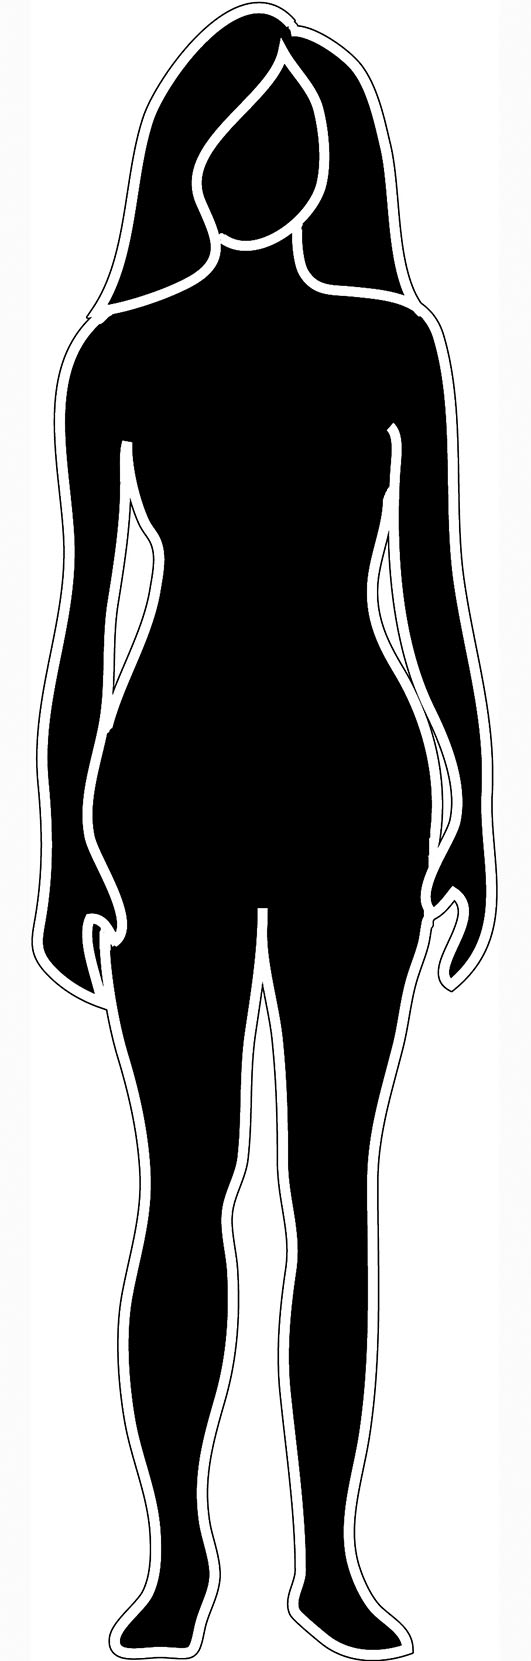 female-body-outline-cliparts-co